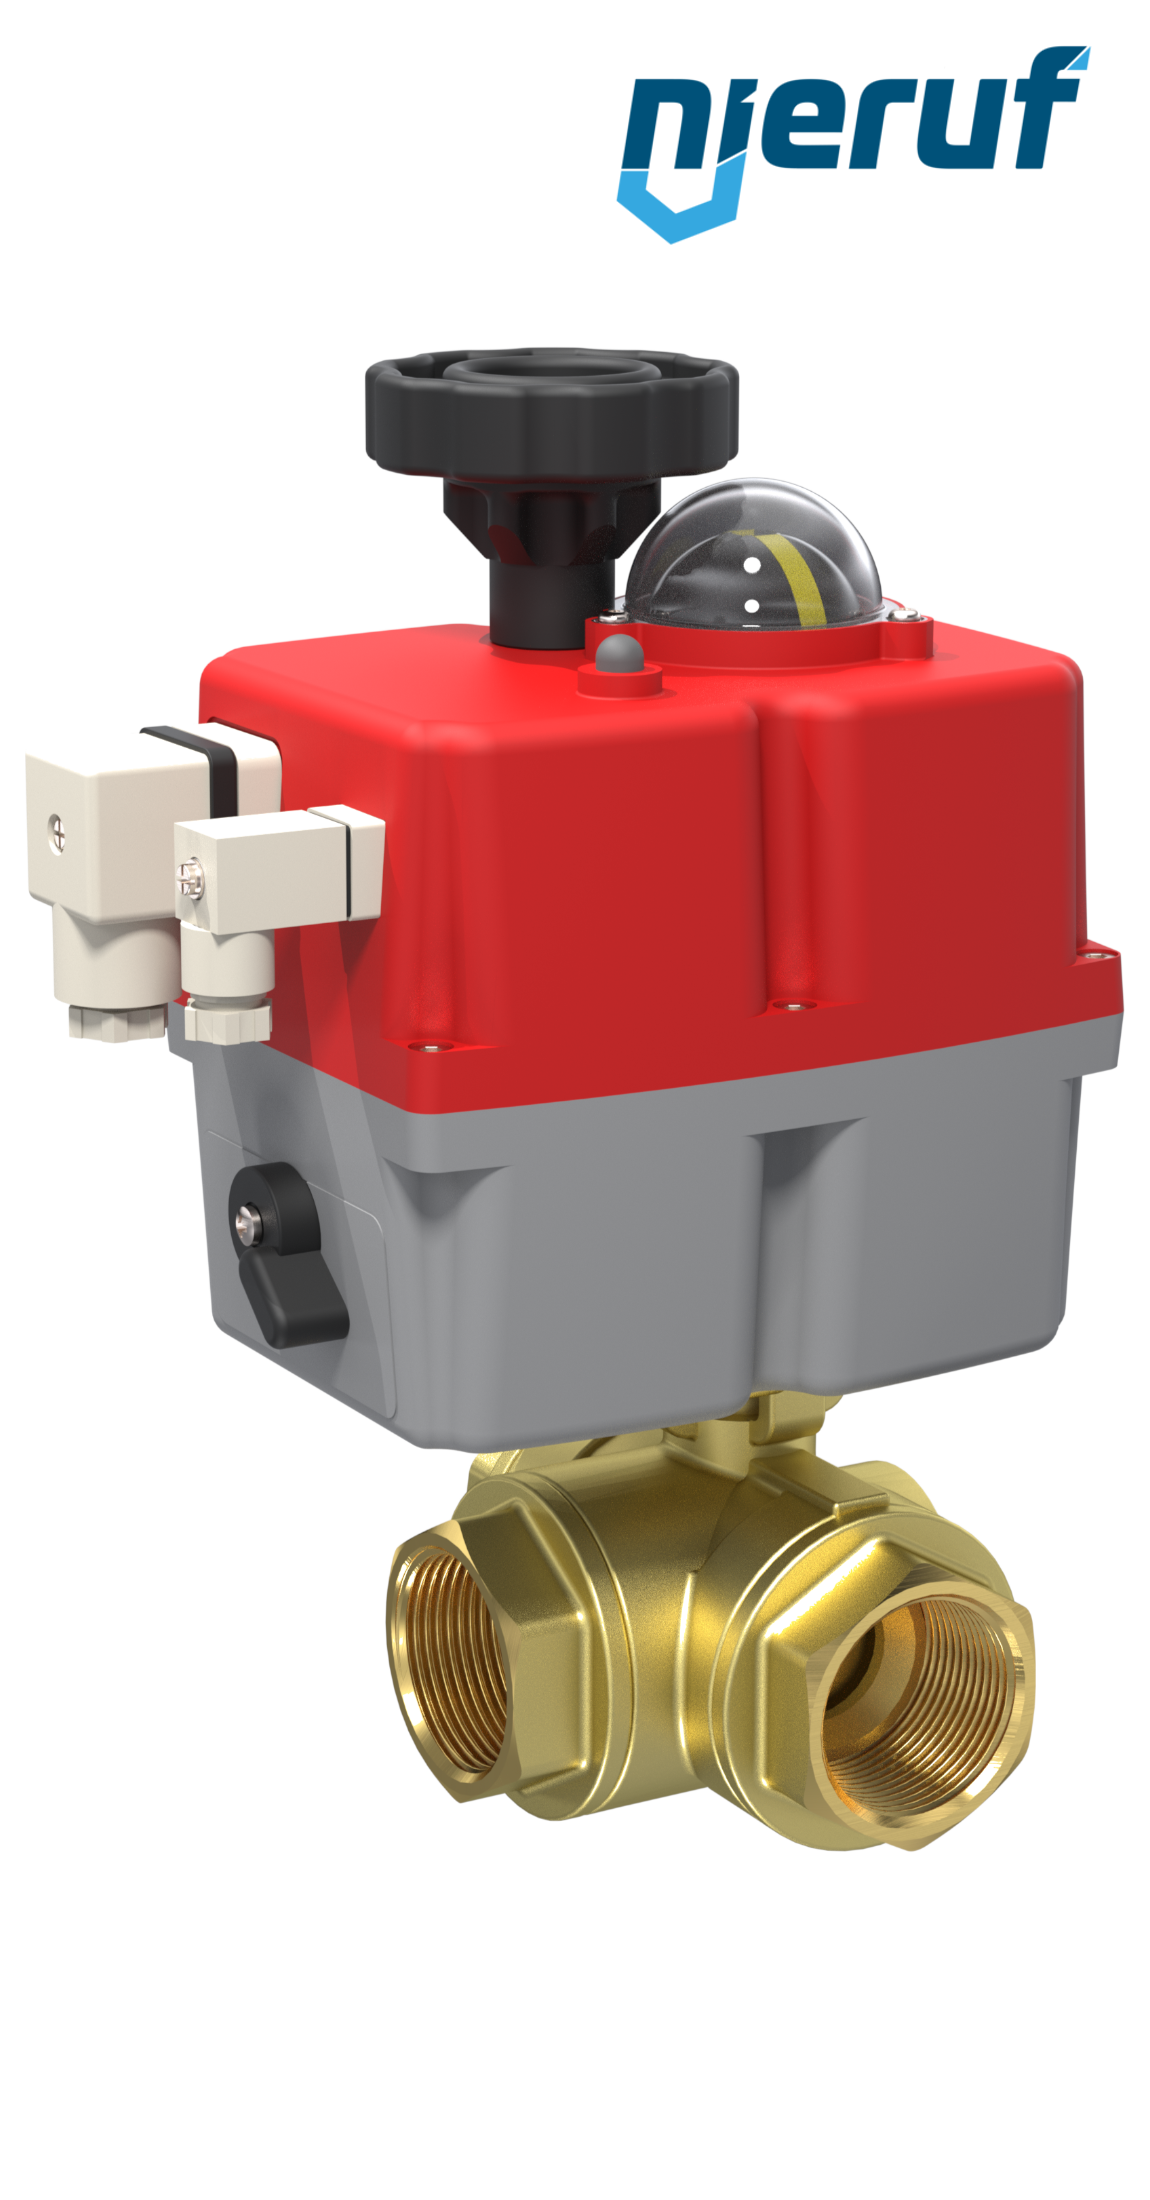 3 way automatic-ball valve 24-240V DN32 - 1 1/4" inch brass full port design with L drilling